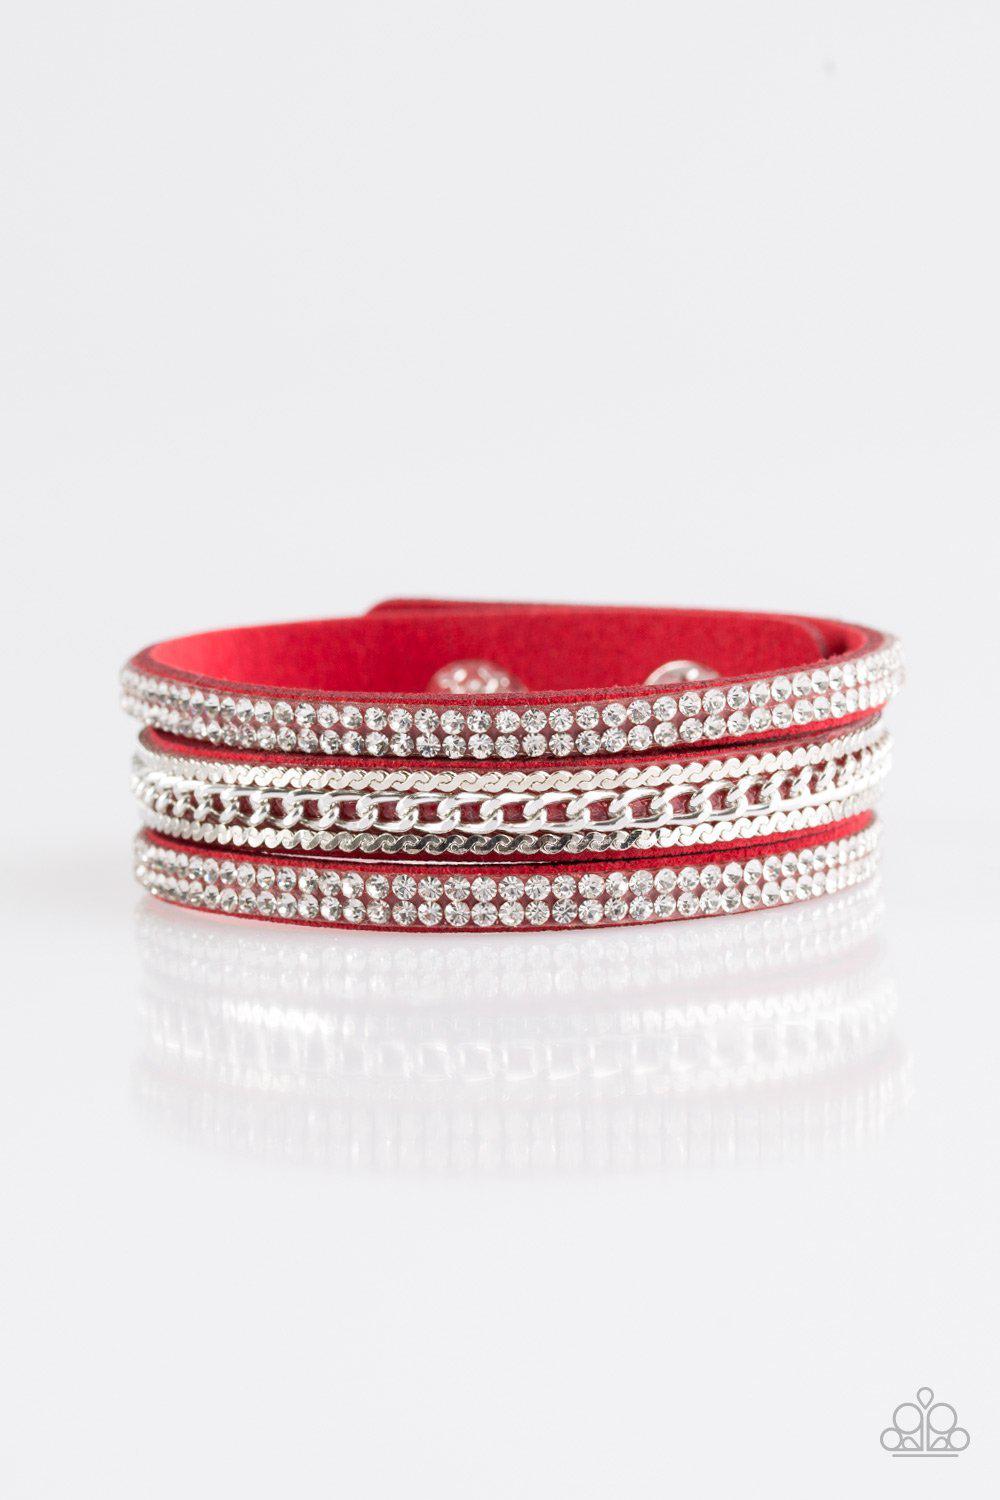 Unstoppable Red Wrap Snap Bracelet - Paparazzi Accessories-CarasShop.com - $5 Jewelry by Cara Jewels